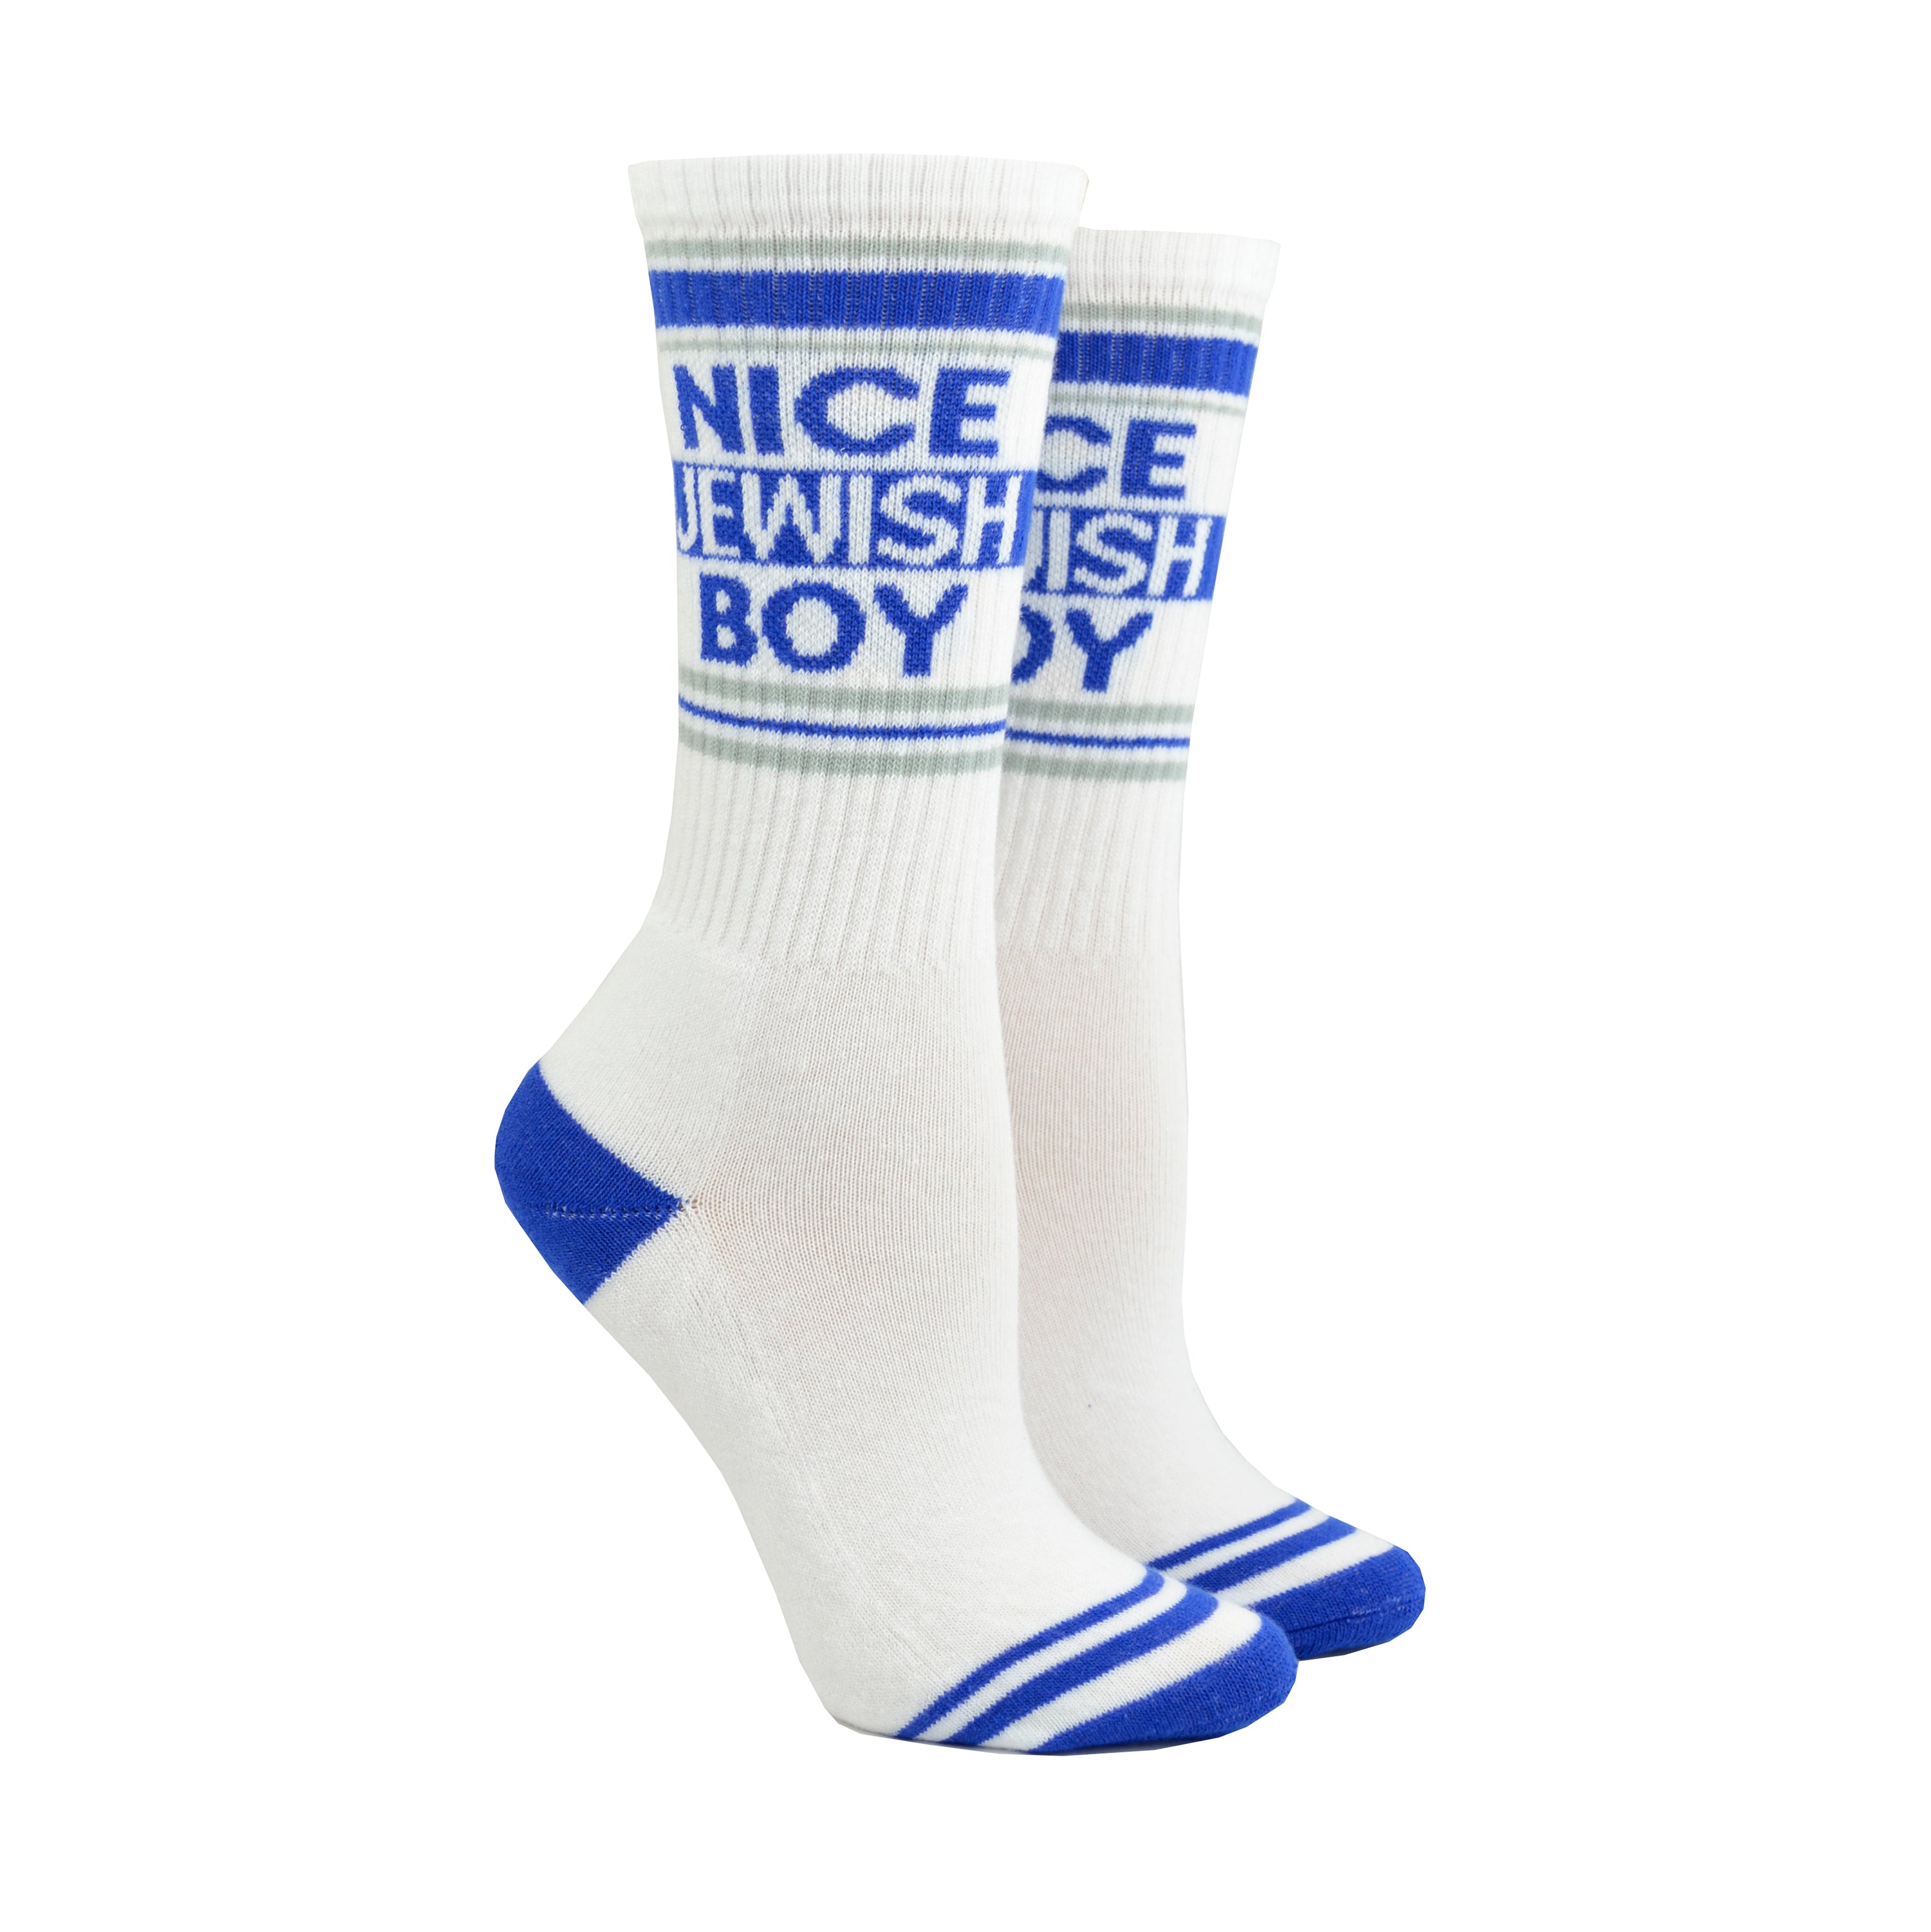 Shown on leg forms, a pair of Gumball Poodle brand unisex cotton crew sock in white with a blue striped cuff/heel/toe and the words, 